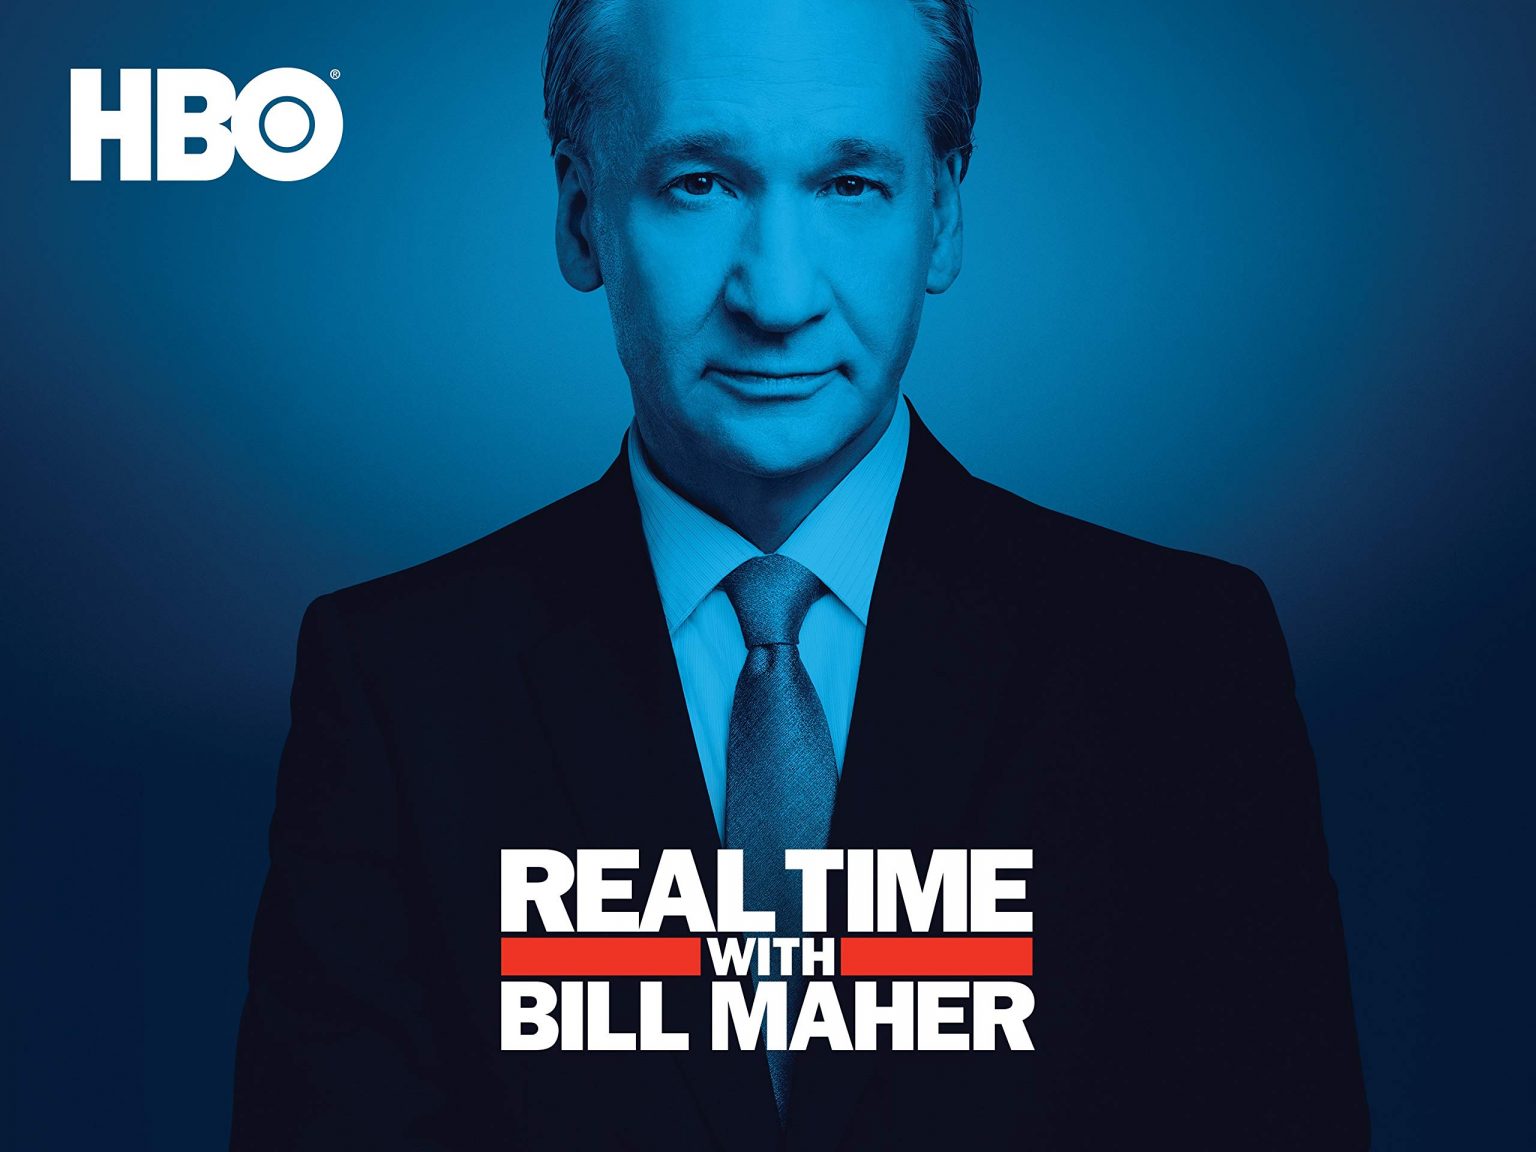 Real Time With Bill Maher Season 19 Episode 21 Release Date & Preview - OtakuKart